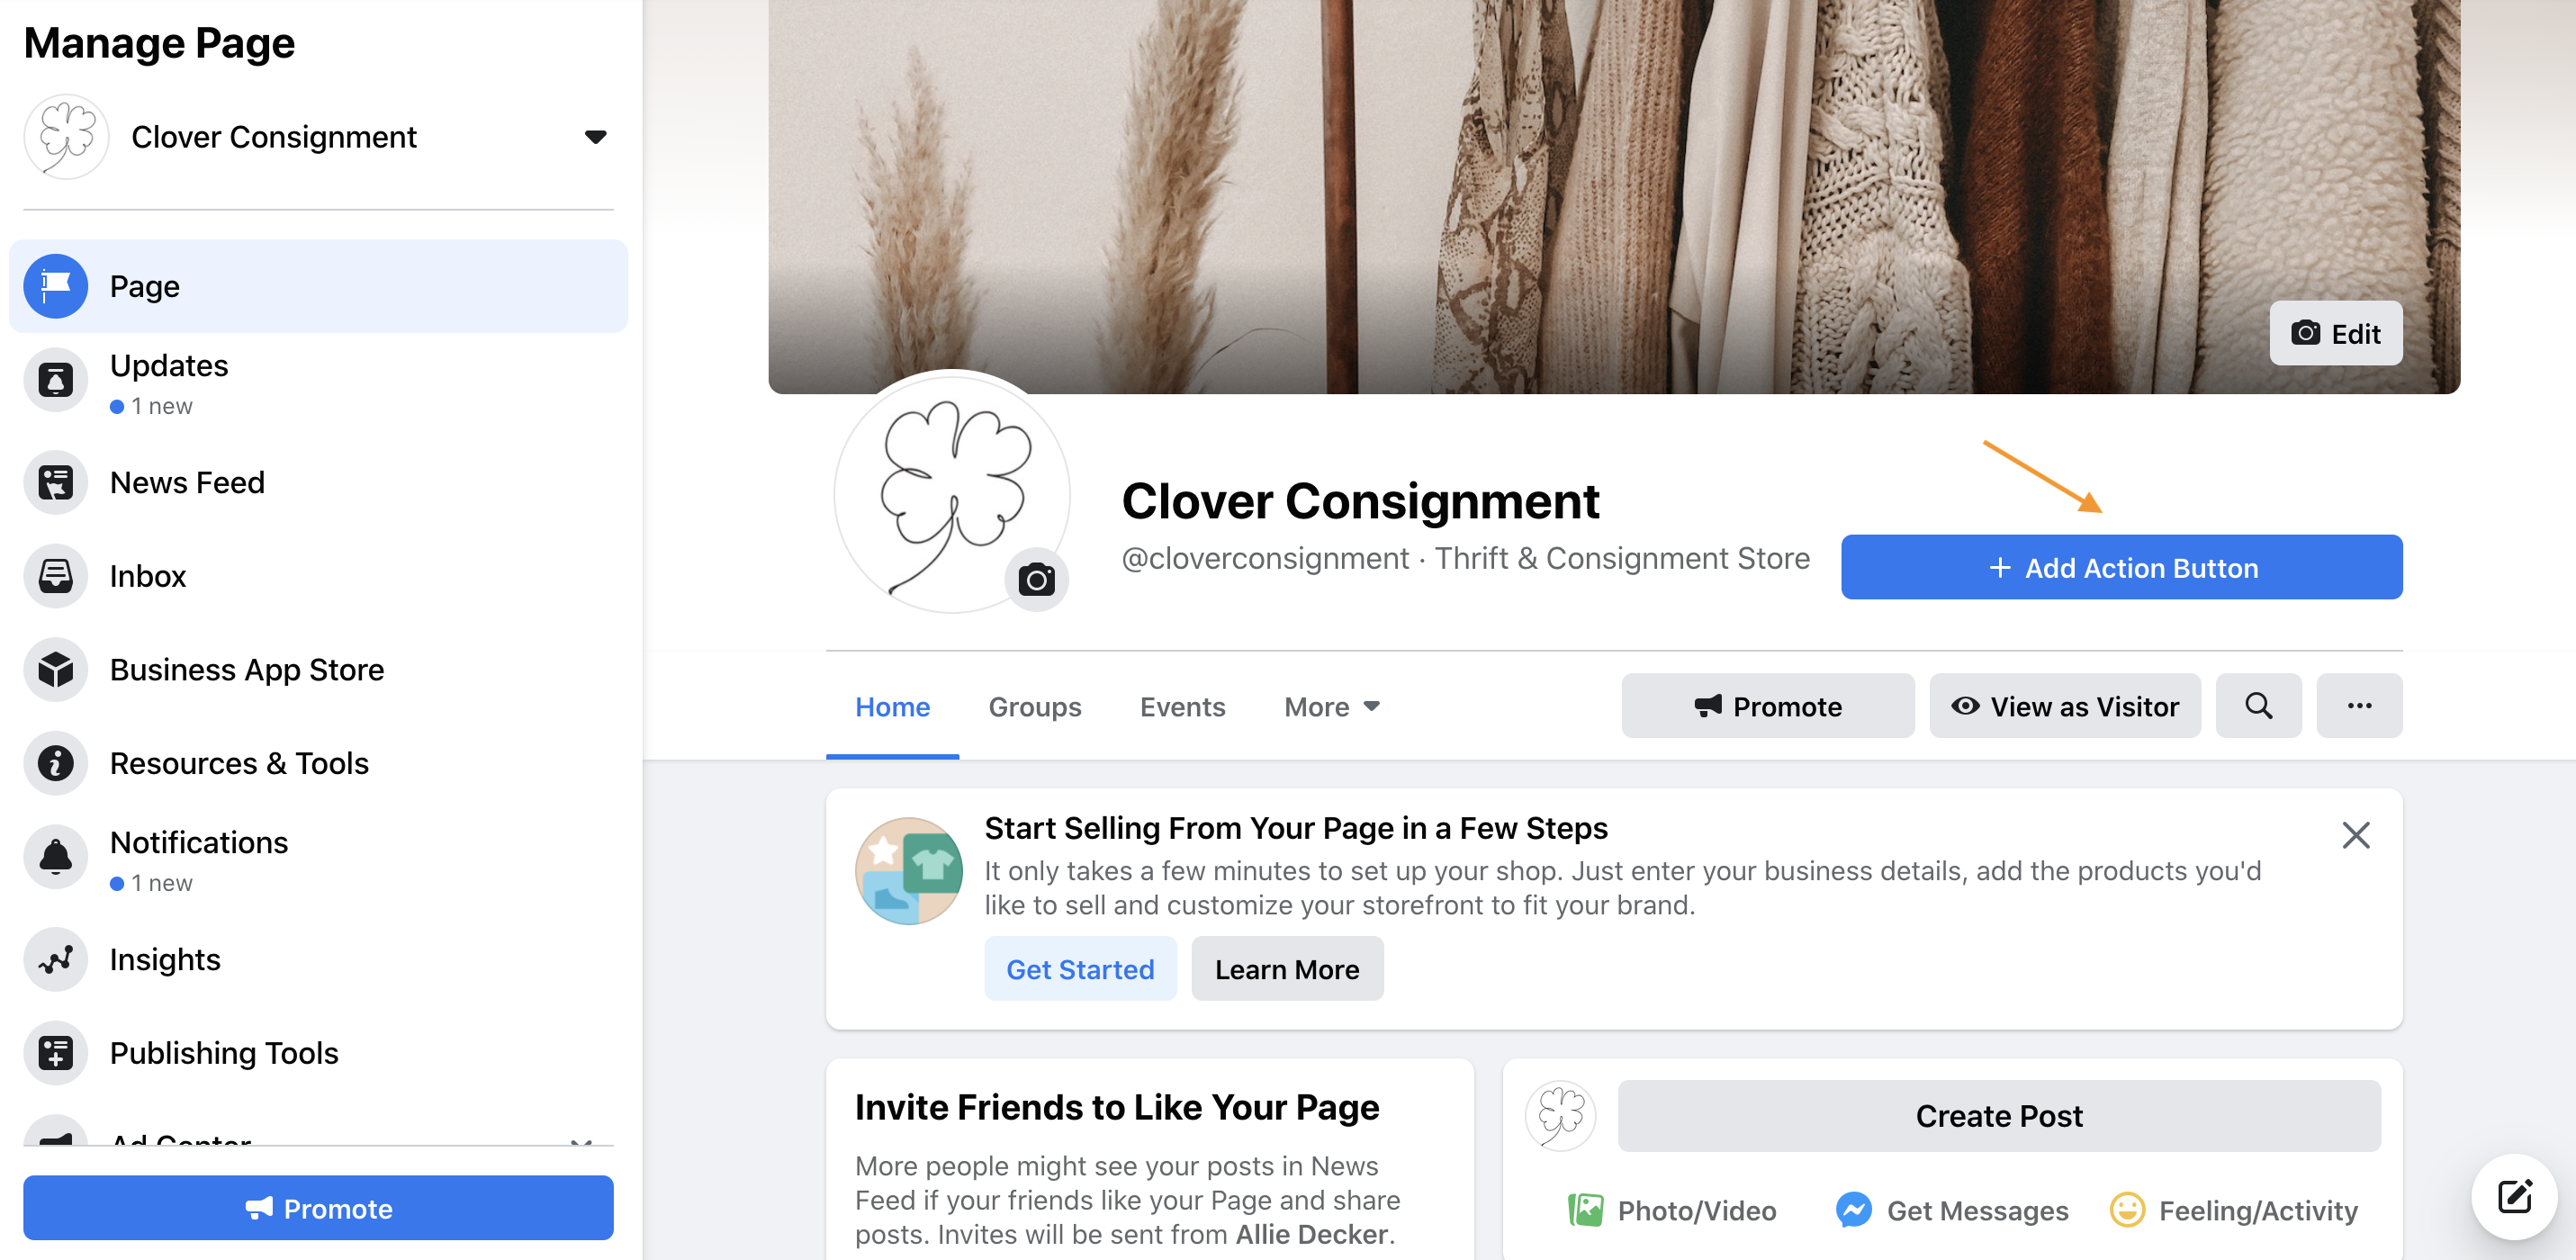 How to Create a Facebook Business Page in 5 Simple Steps [Tutorial]